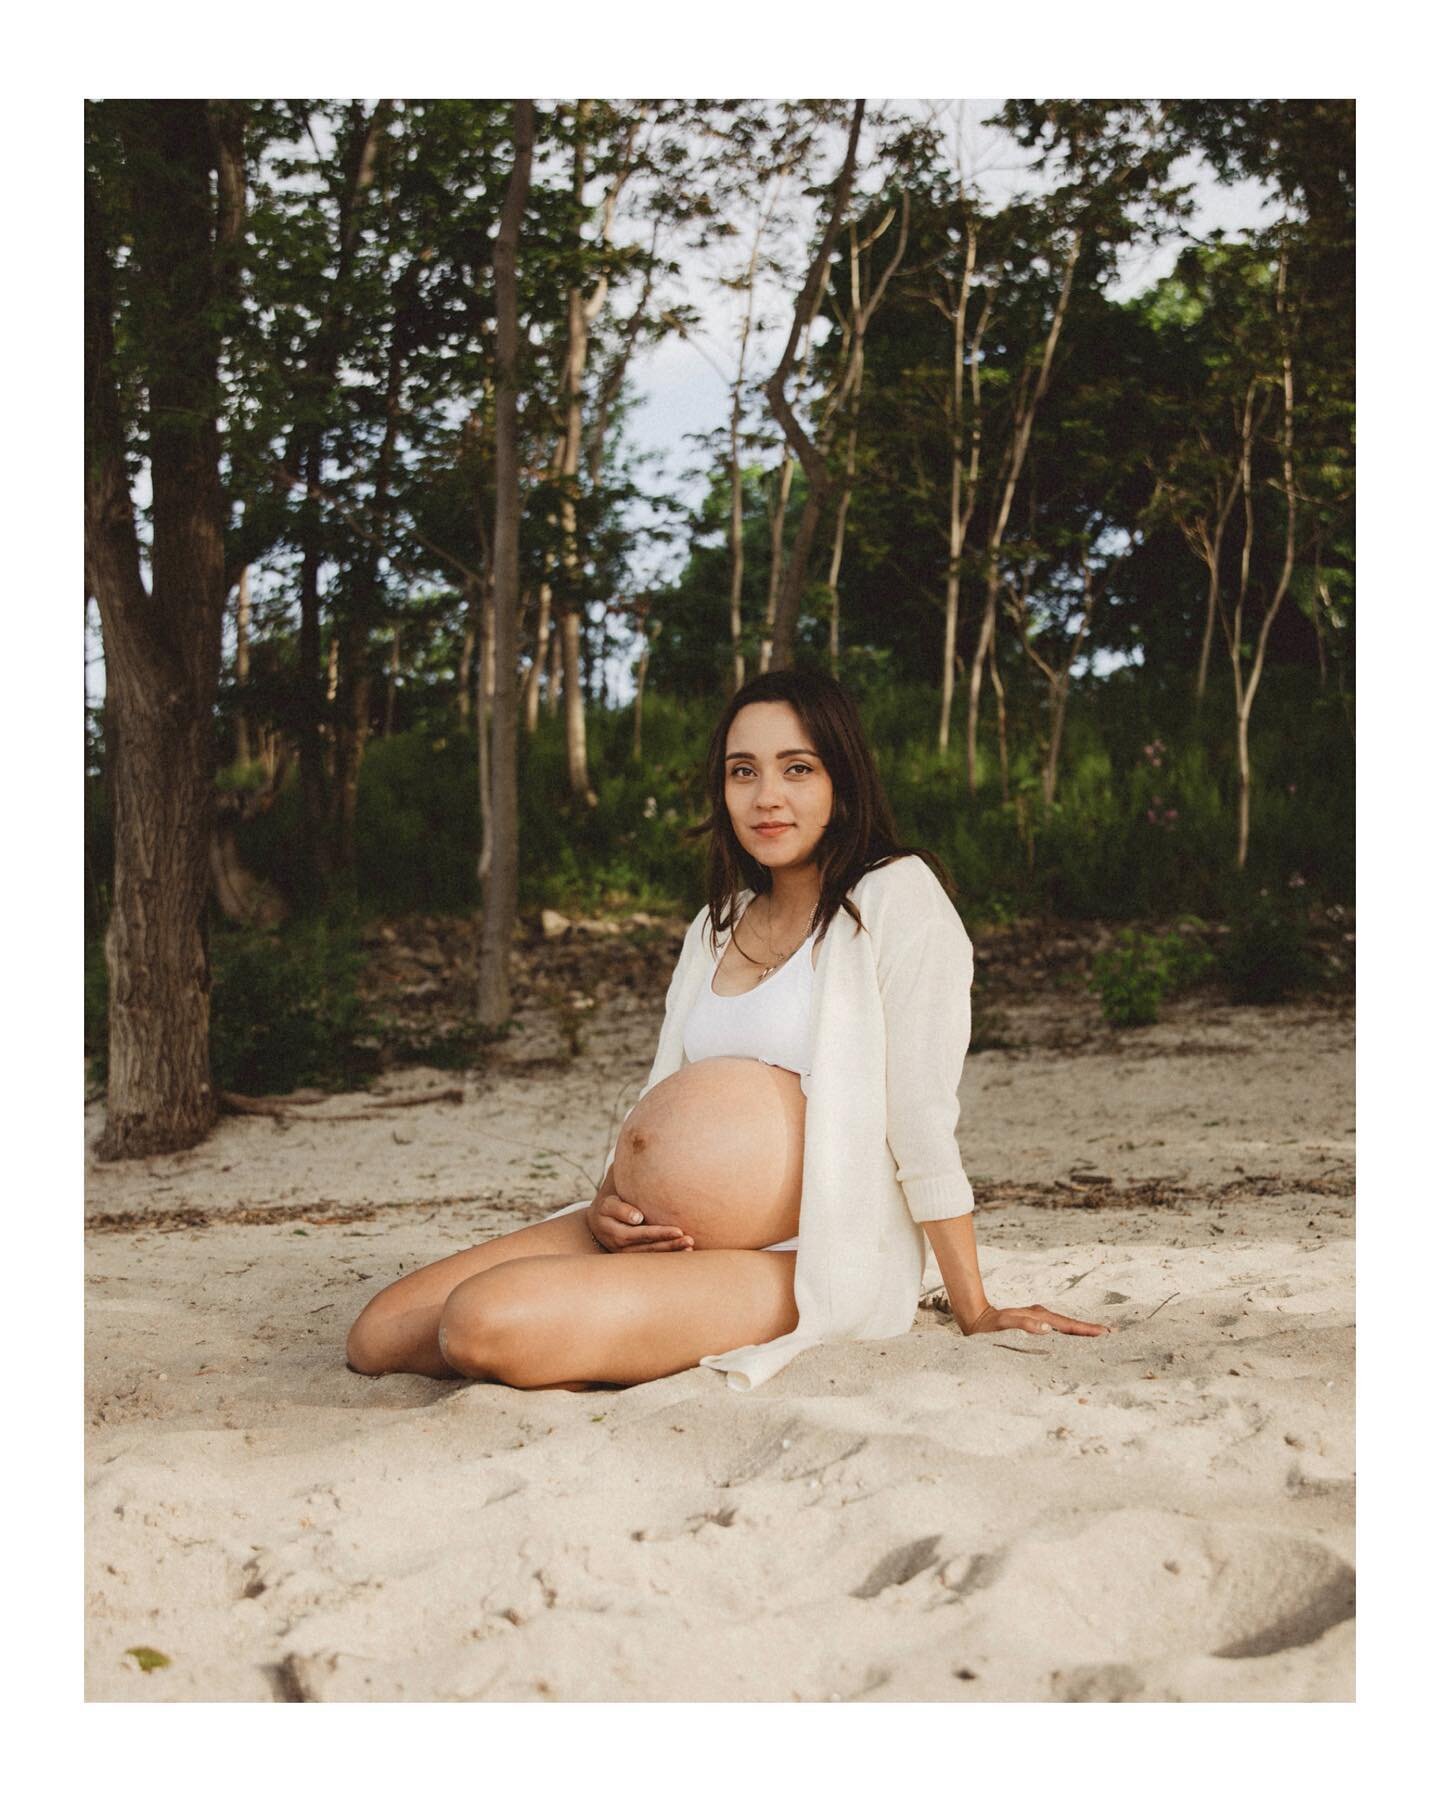 Been a while since I last shot maternity photos~

I&rsquo;d love to shoot more lifestyle-y things like this now that the weather is warming up! Shoot me a message maybe? 🥹

#maternityphotos #maternityphotography #maternityshoot #maternityphotoshoot 